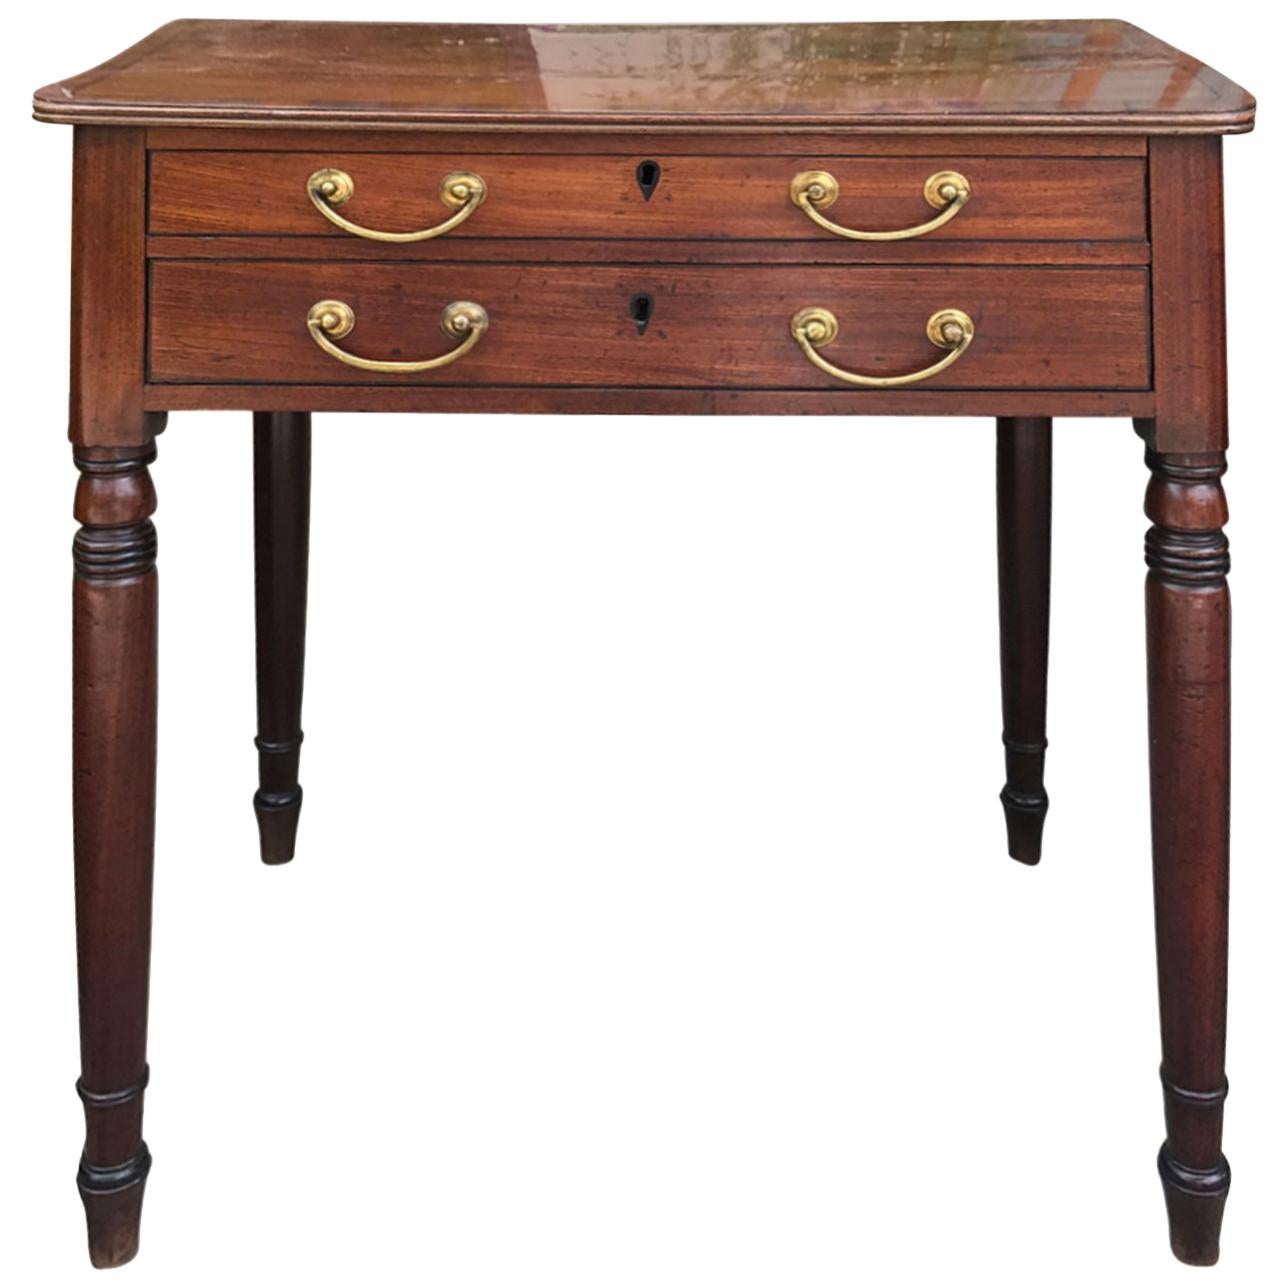 19th Century/circa 1830s Small Regency Mahogany Writing Table with Two-Drawers